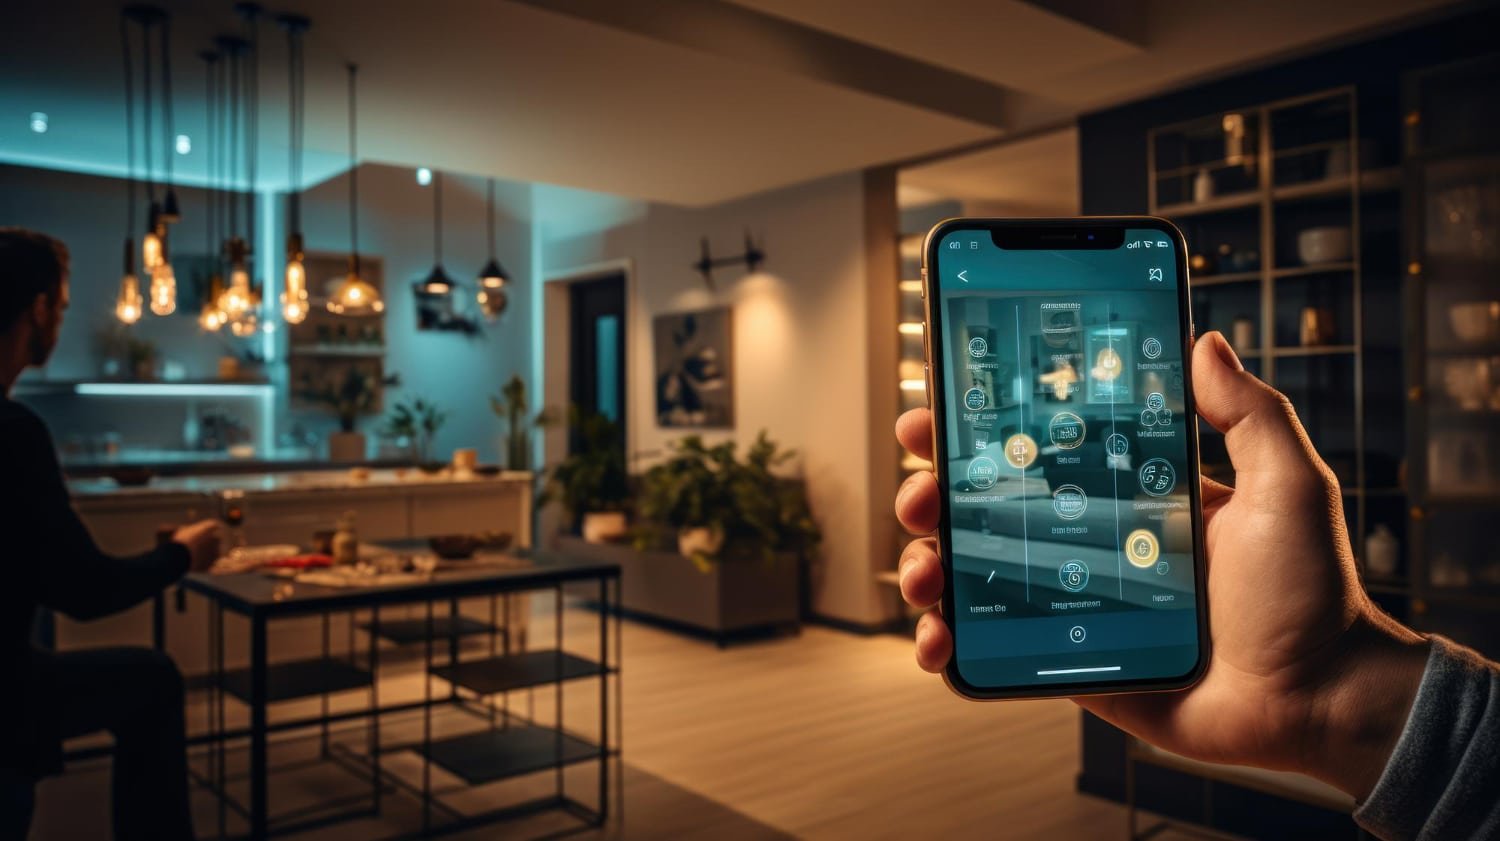 Upgrade Your Home Security With Wyze’s Smart Technology